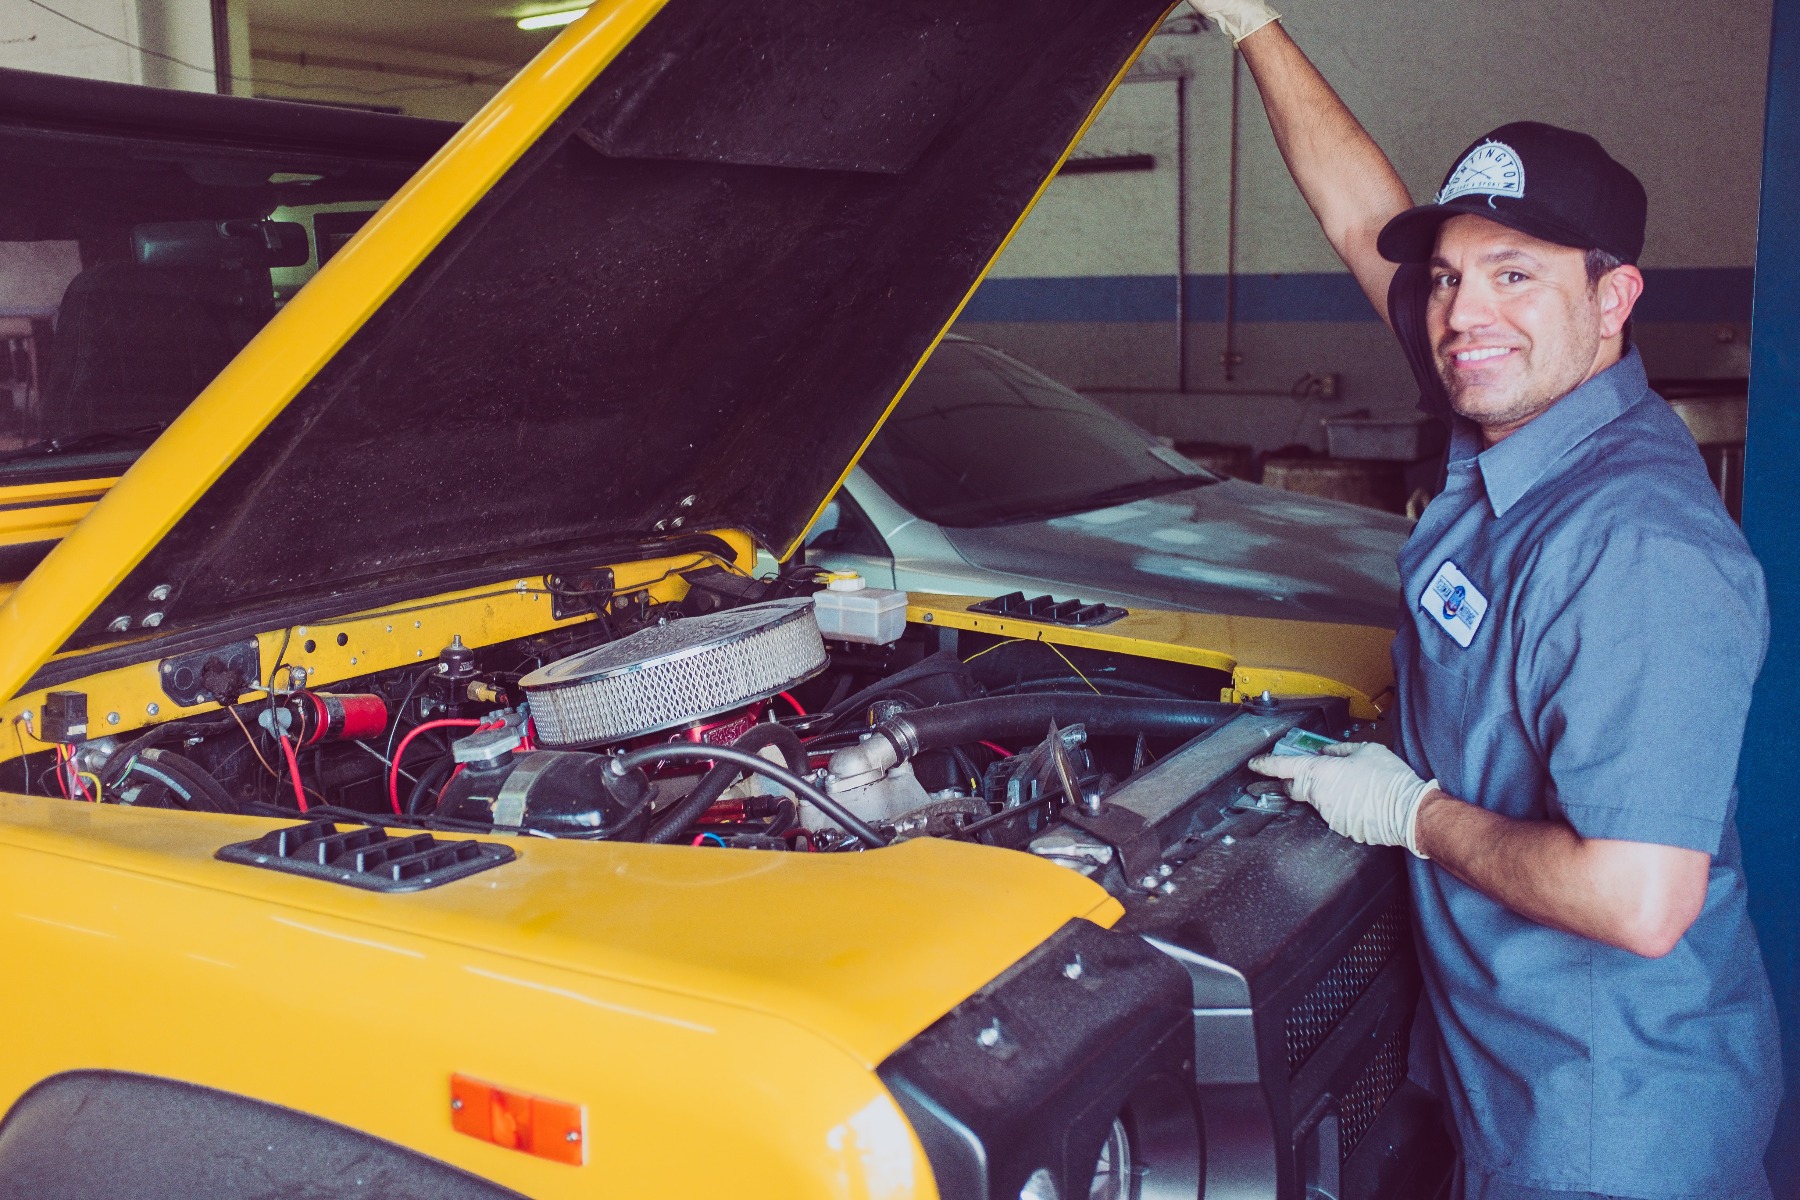 A mechanic works under the hood of a car using heat shrink tubing to combine wires.